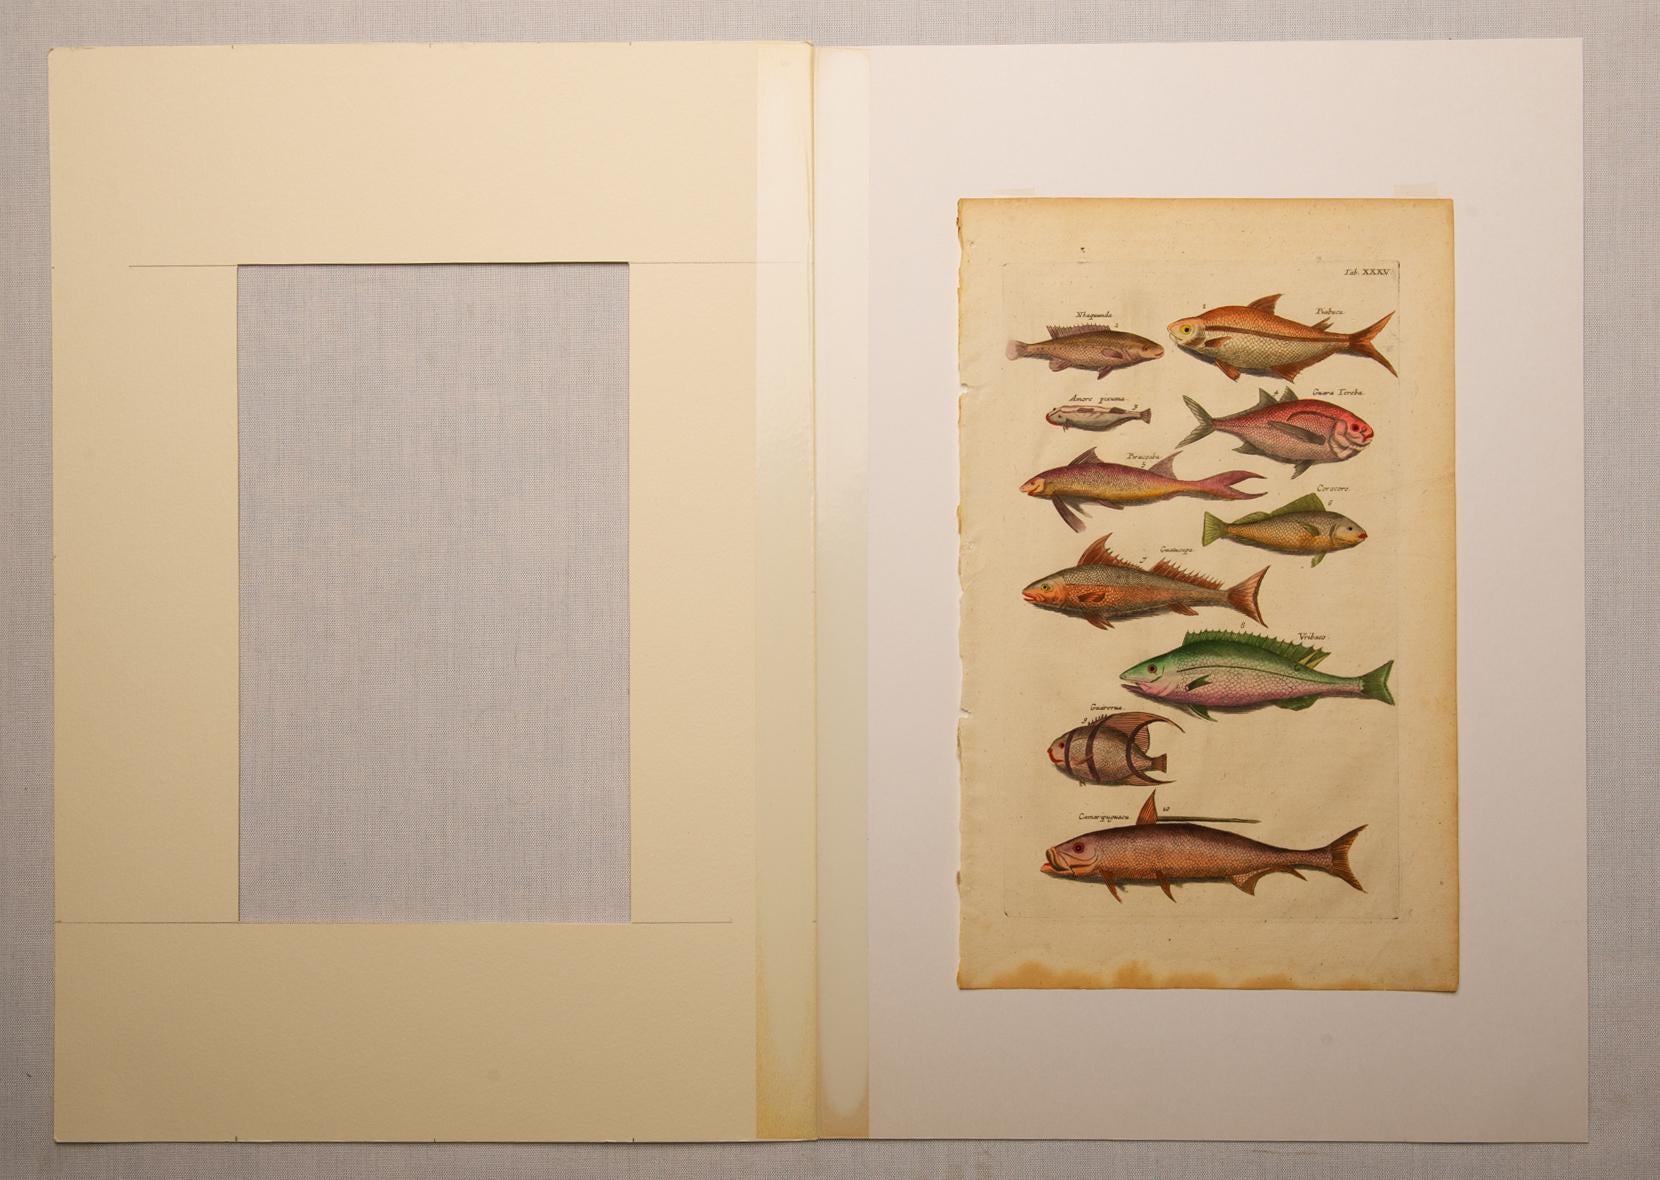 Other Rare Series of Fishes Etchings in Latin